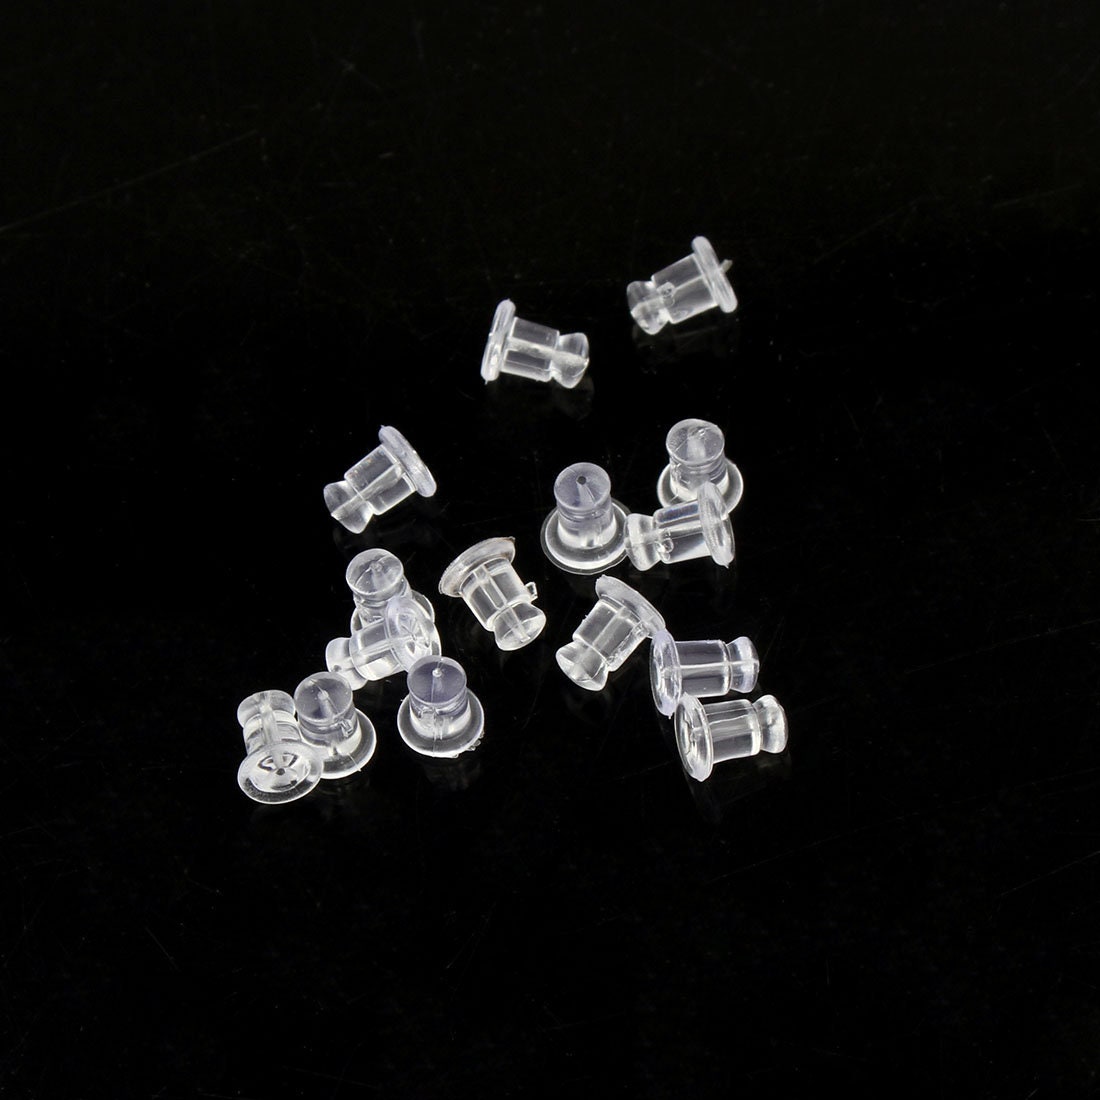 100 silicone earring backs, 7x5mm clear ear nuts, Jewelry making stoppers